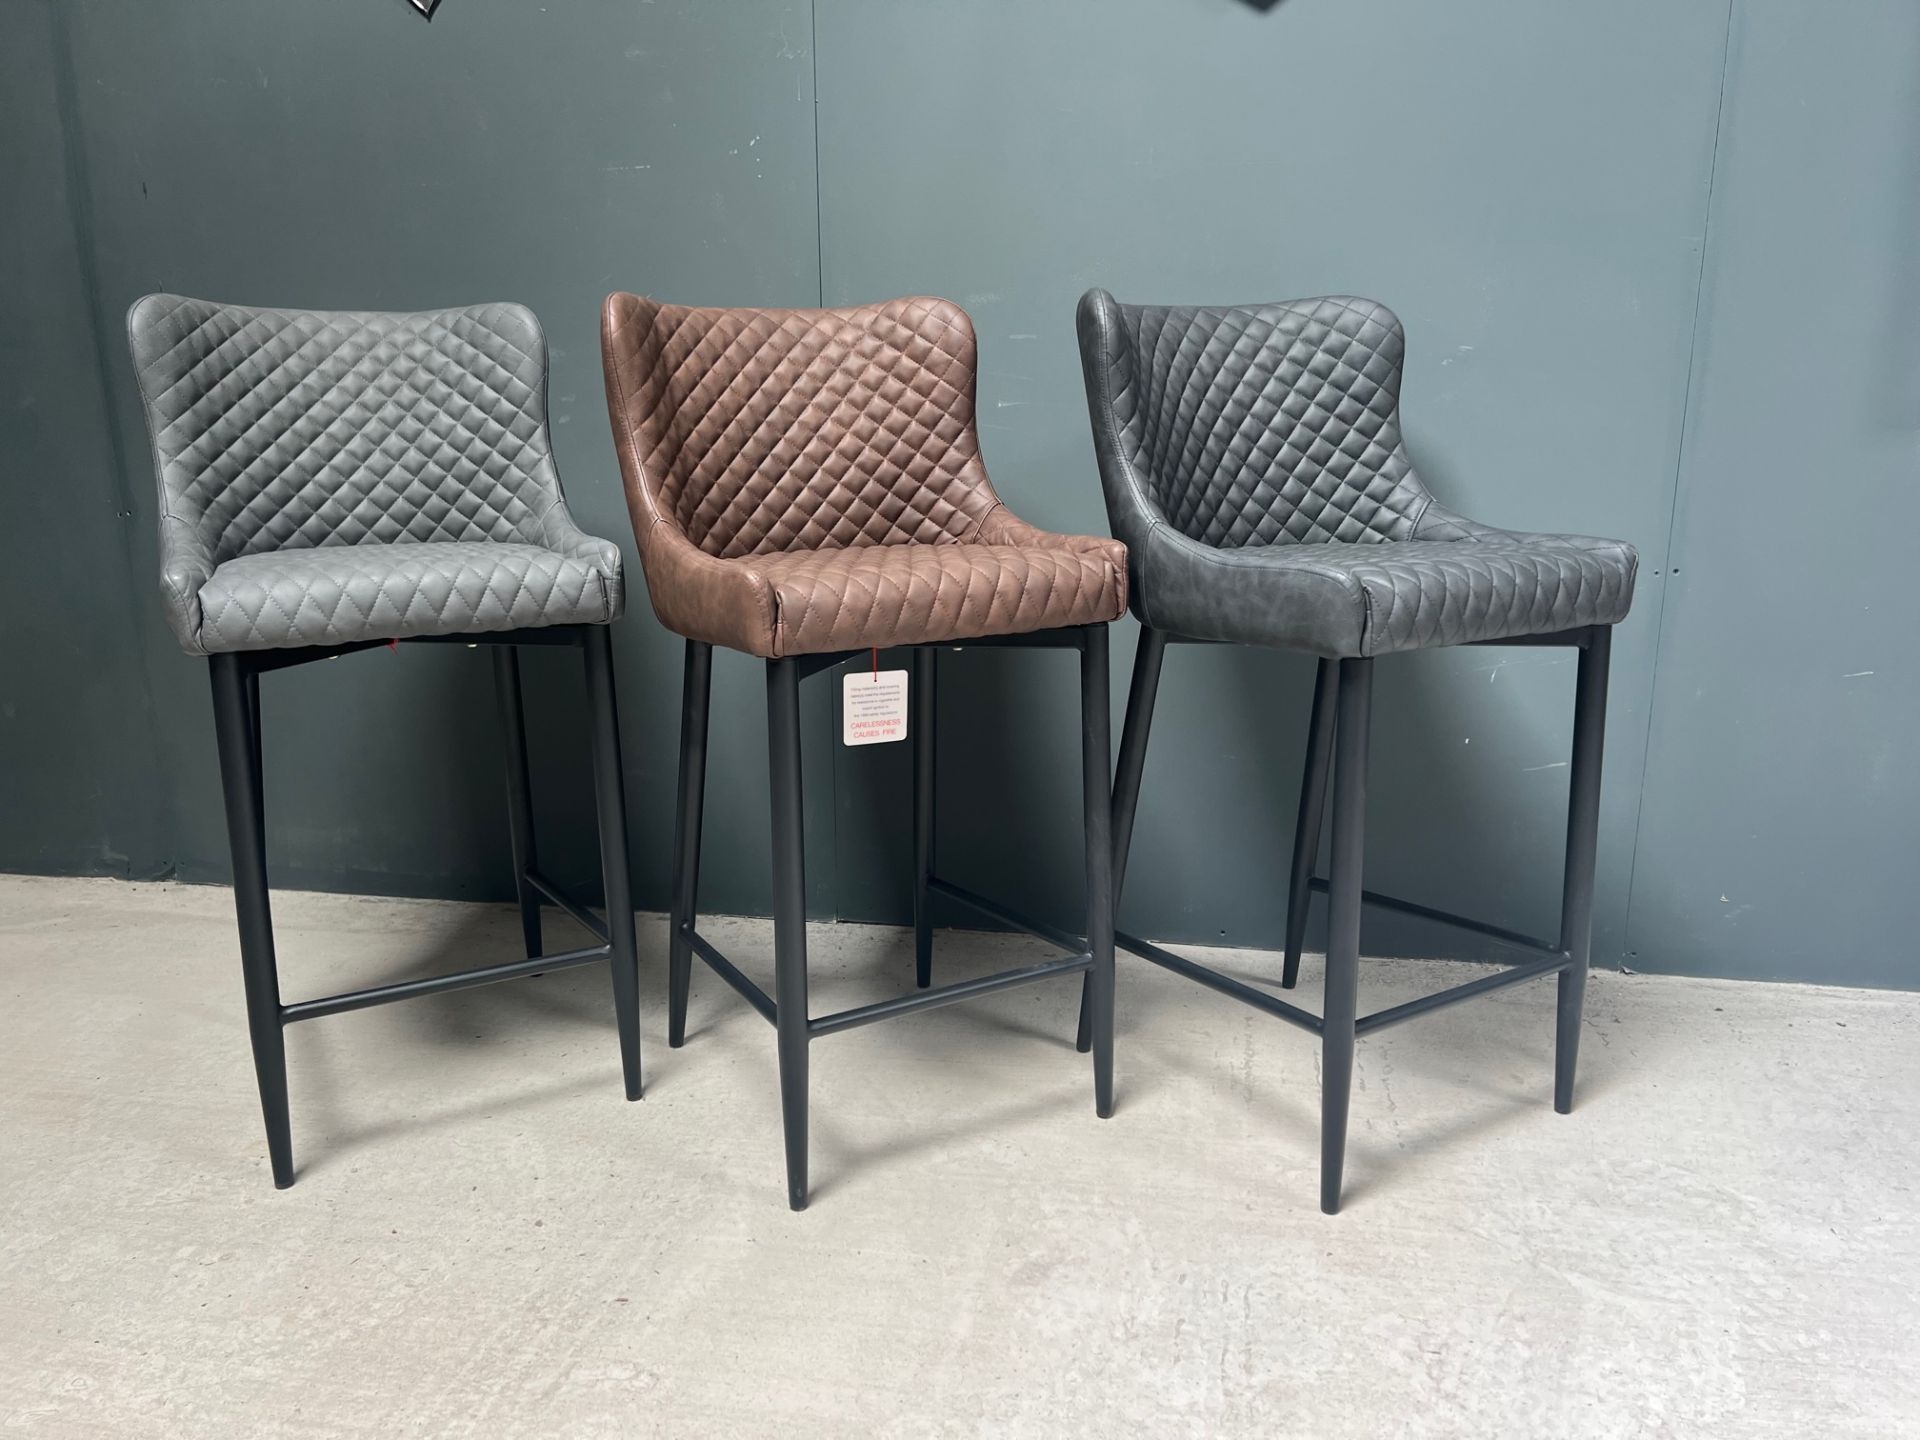 BOXED NEW PAIR OF CLASSIC PU LEATHER HIGH BAR STOOLS IN GREY - Image 2 of 3